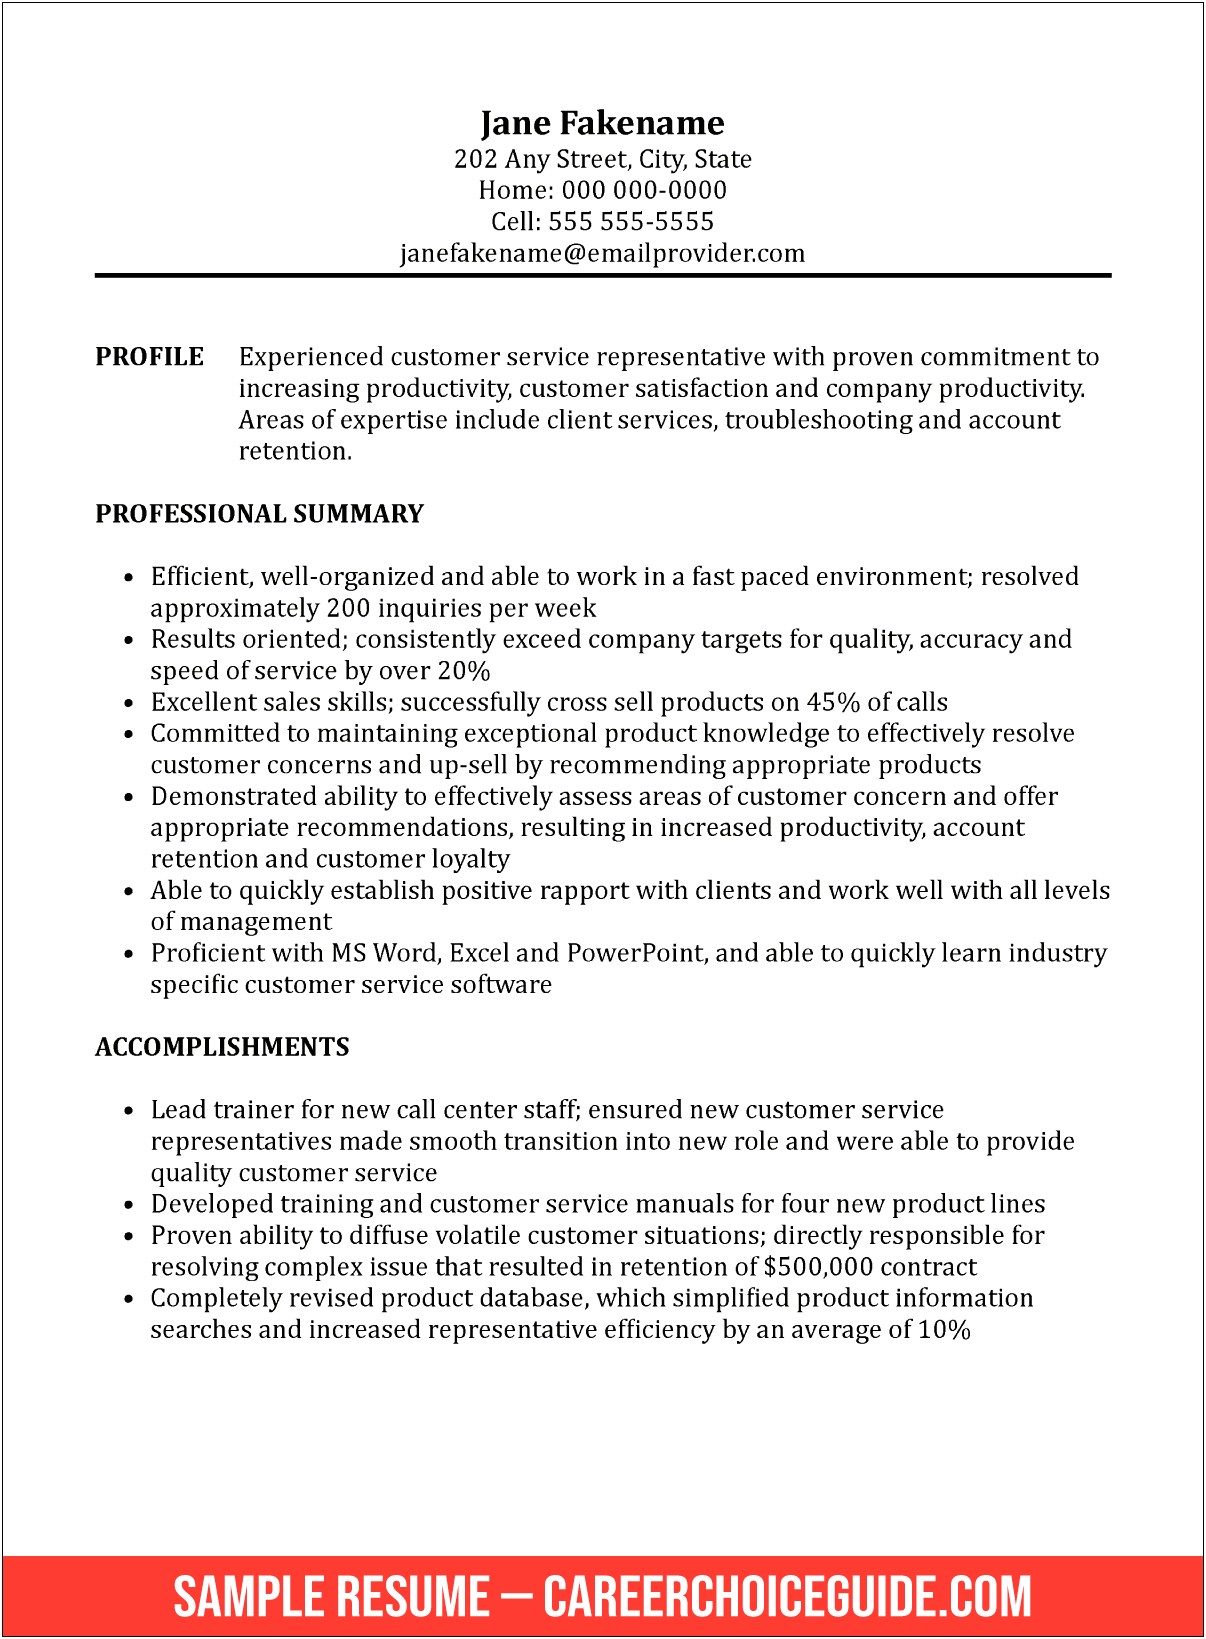 Example Summary On Resumes For Customer Service